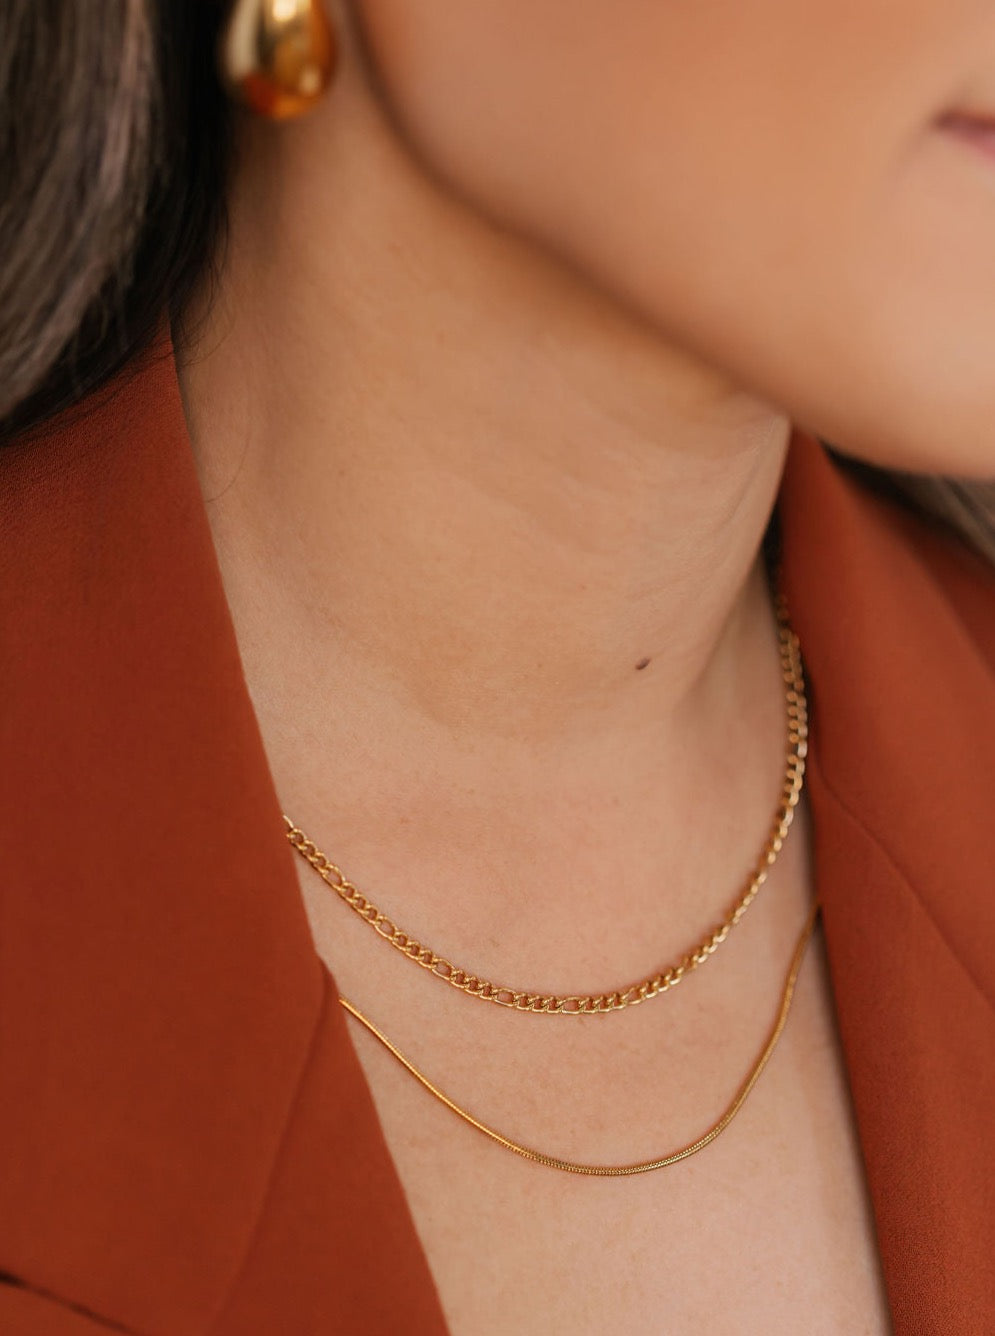 water proof layering chain necklaces